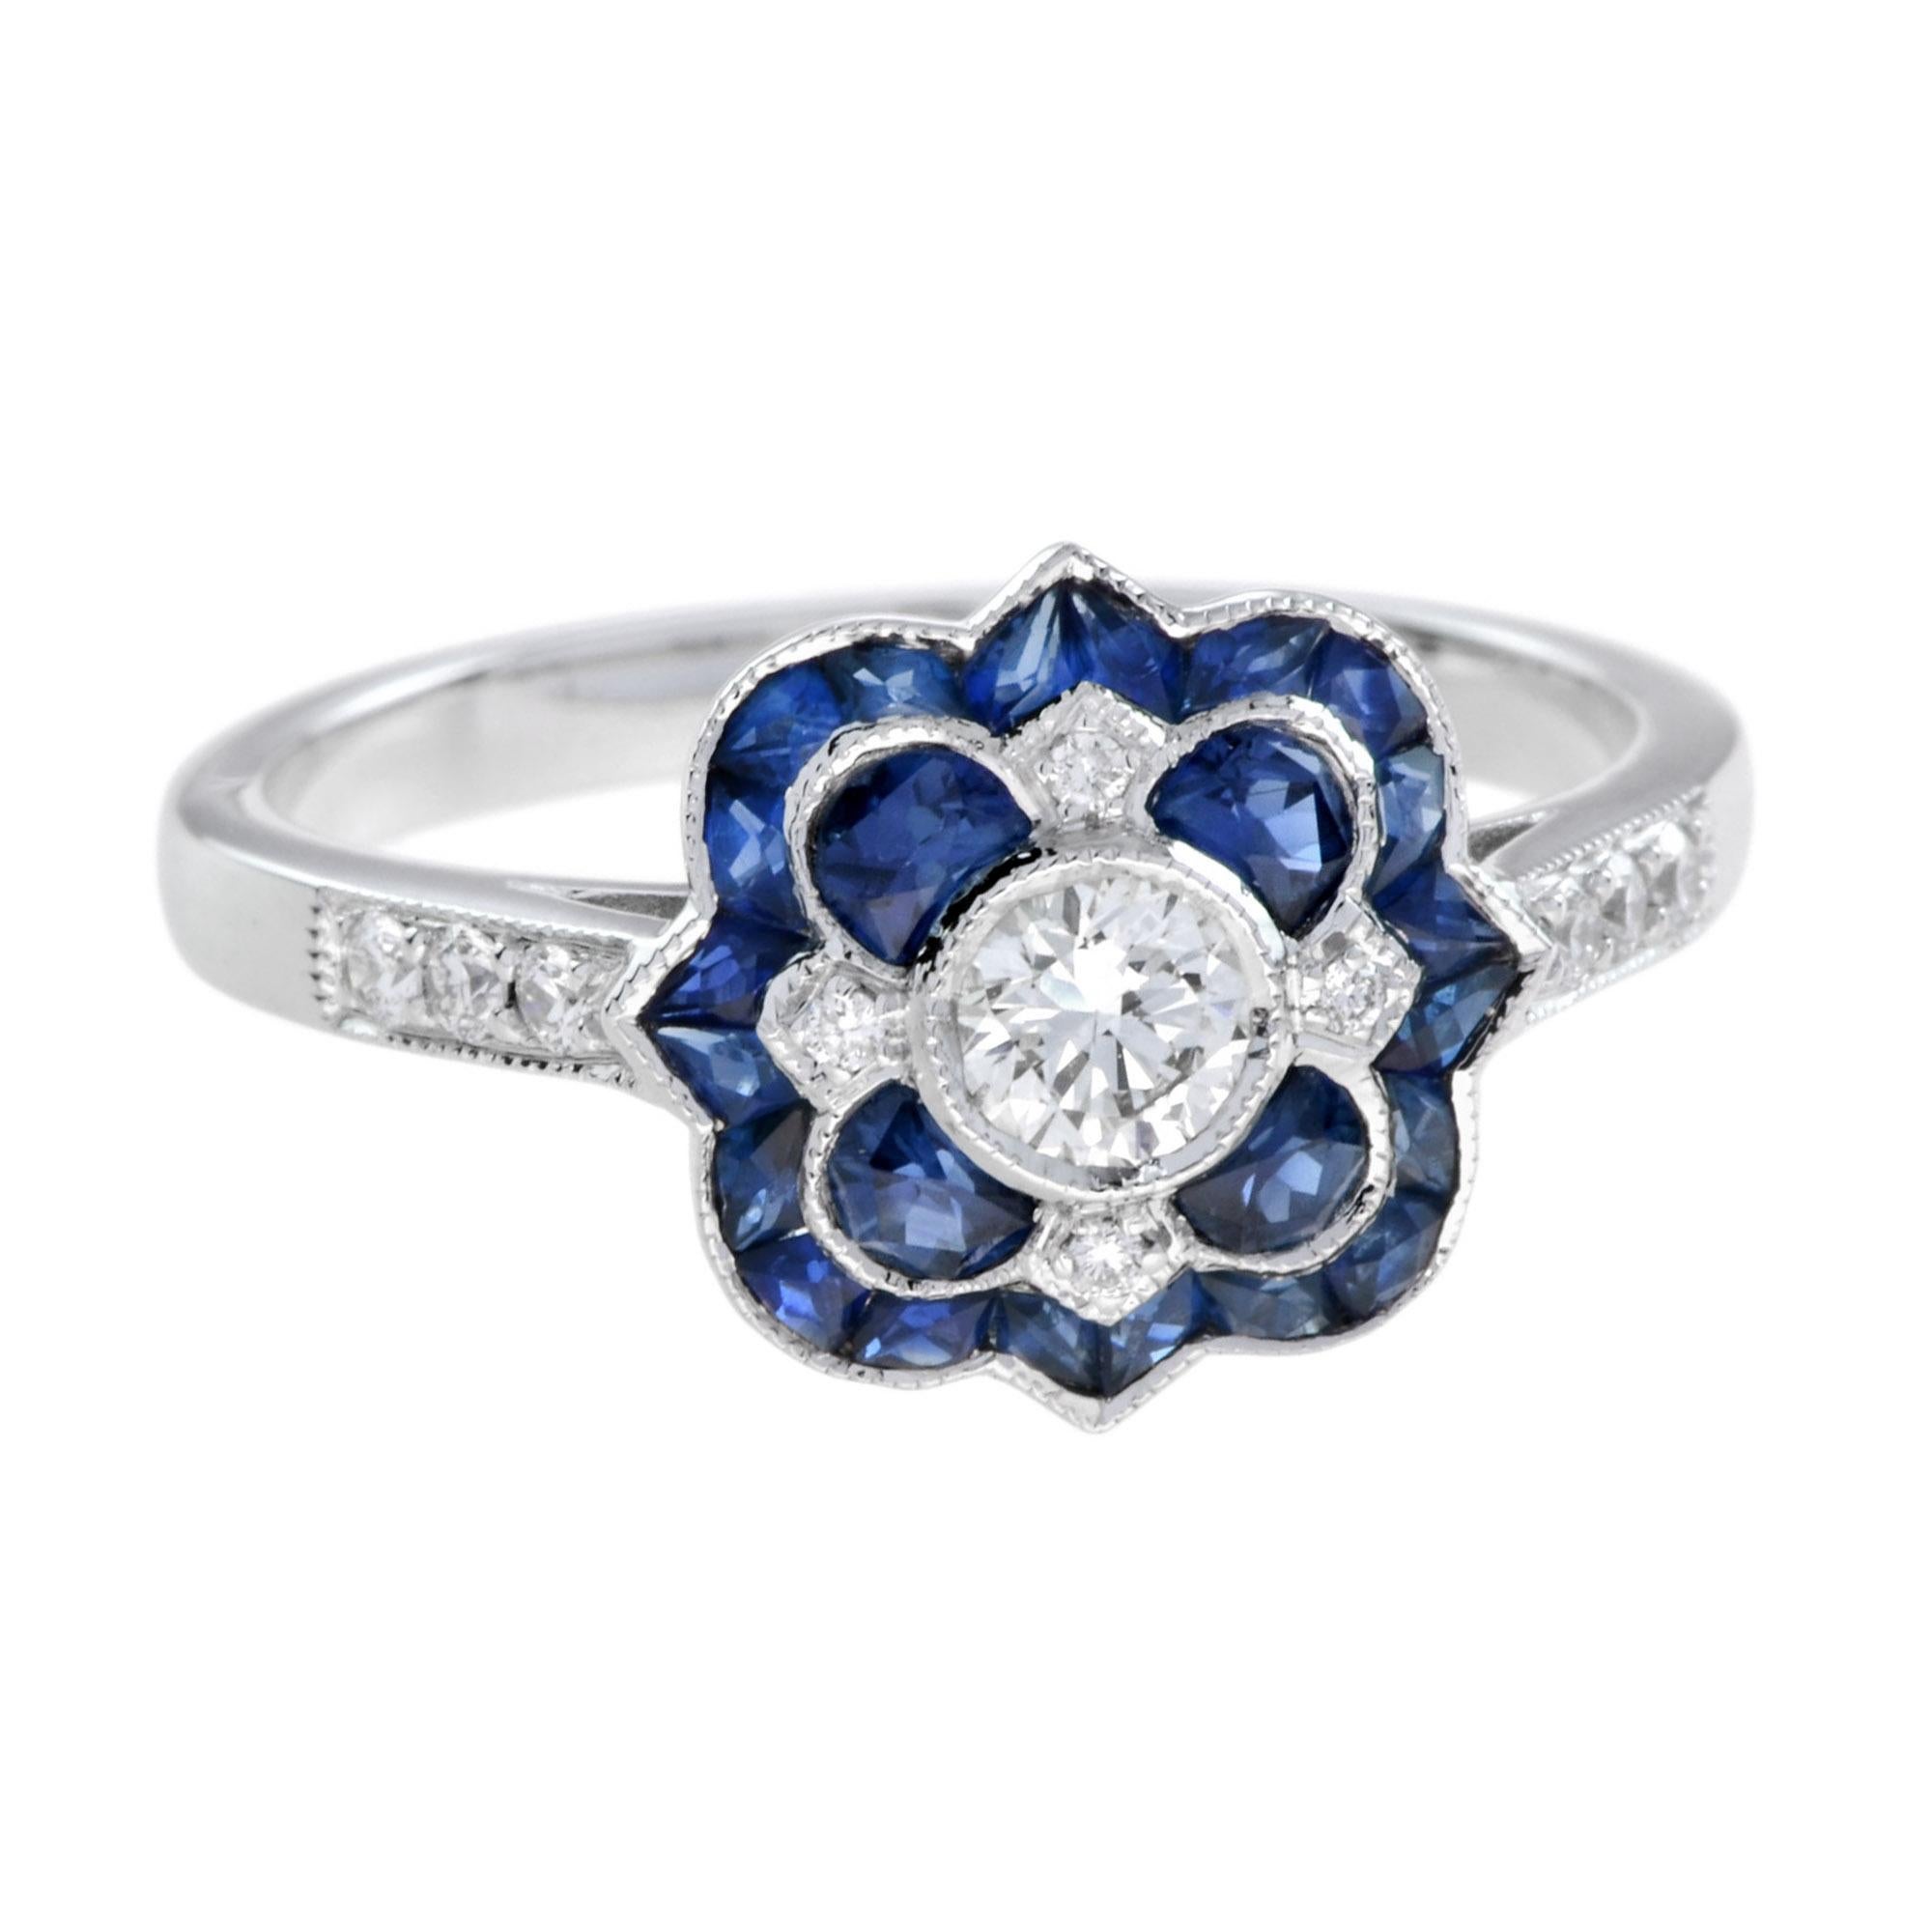 For Sale:  Art Deco Style Diamond and Sapphire Ring in 18K White Gold 5